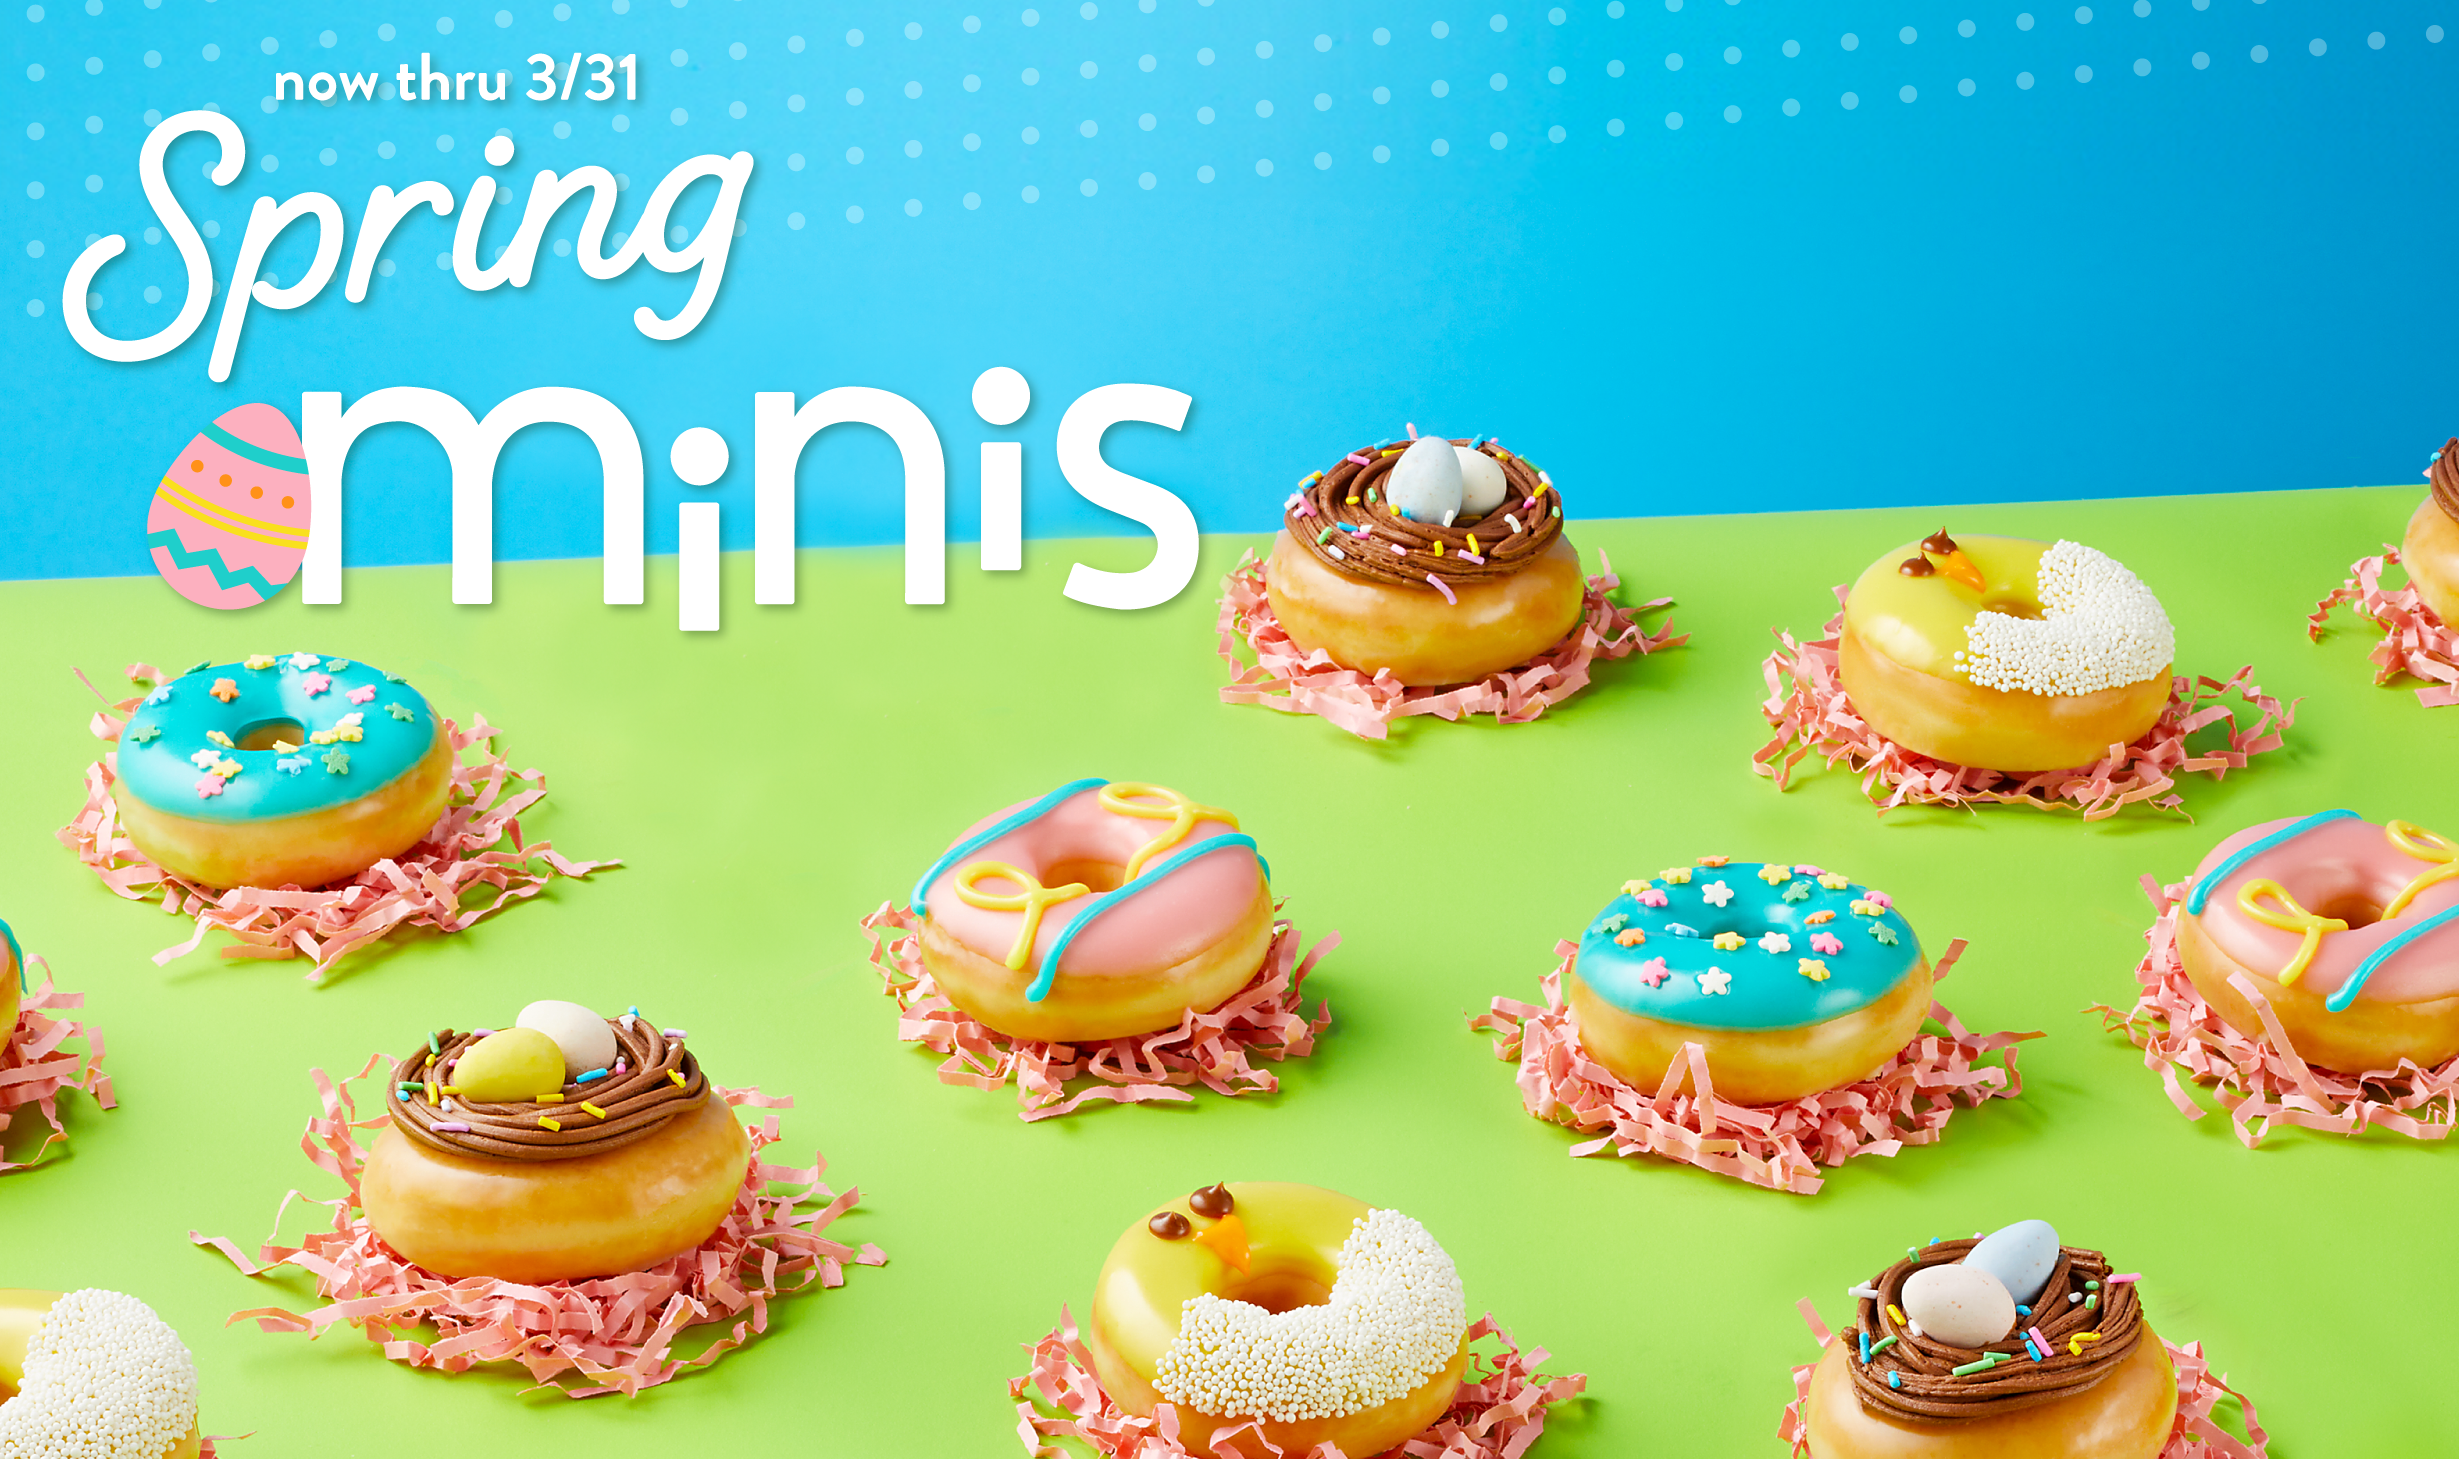 spring minis banner image - sea of cute baby animal decorated doughnuts